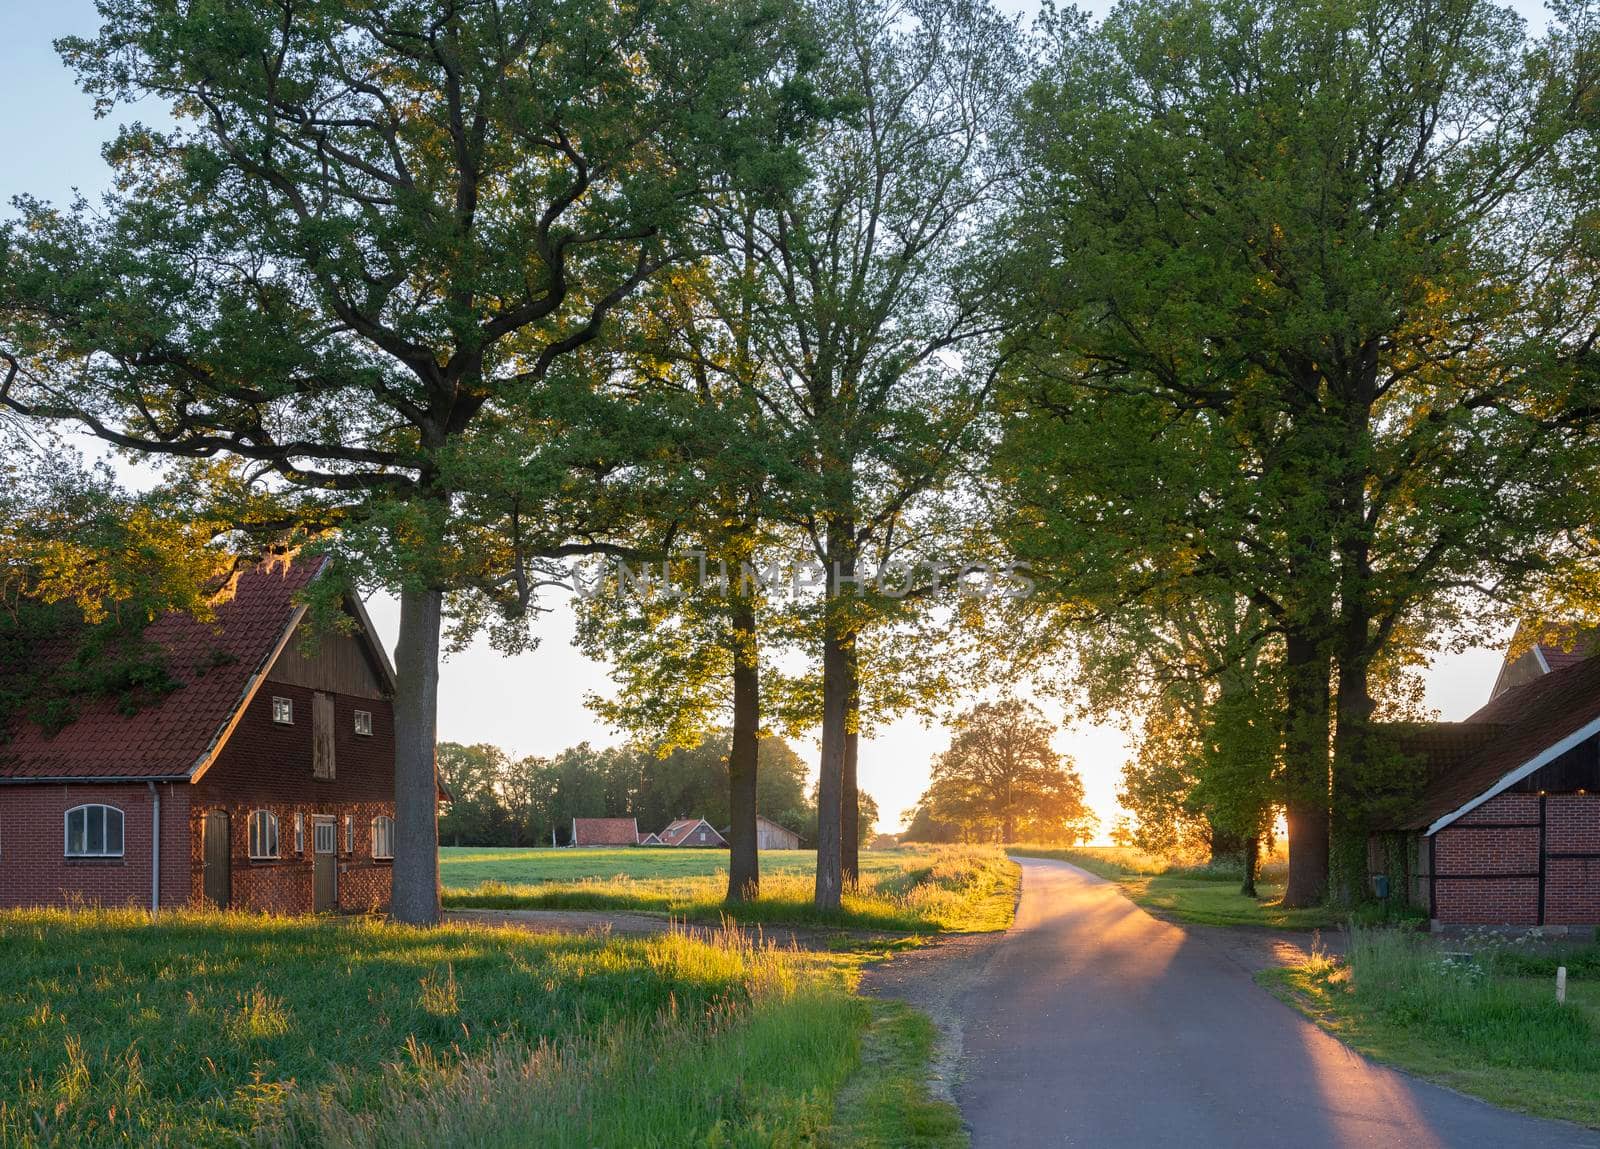 old barns and farm at sunset in rural area of twente near oldenzaal and denekamp in the netherlands